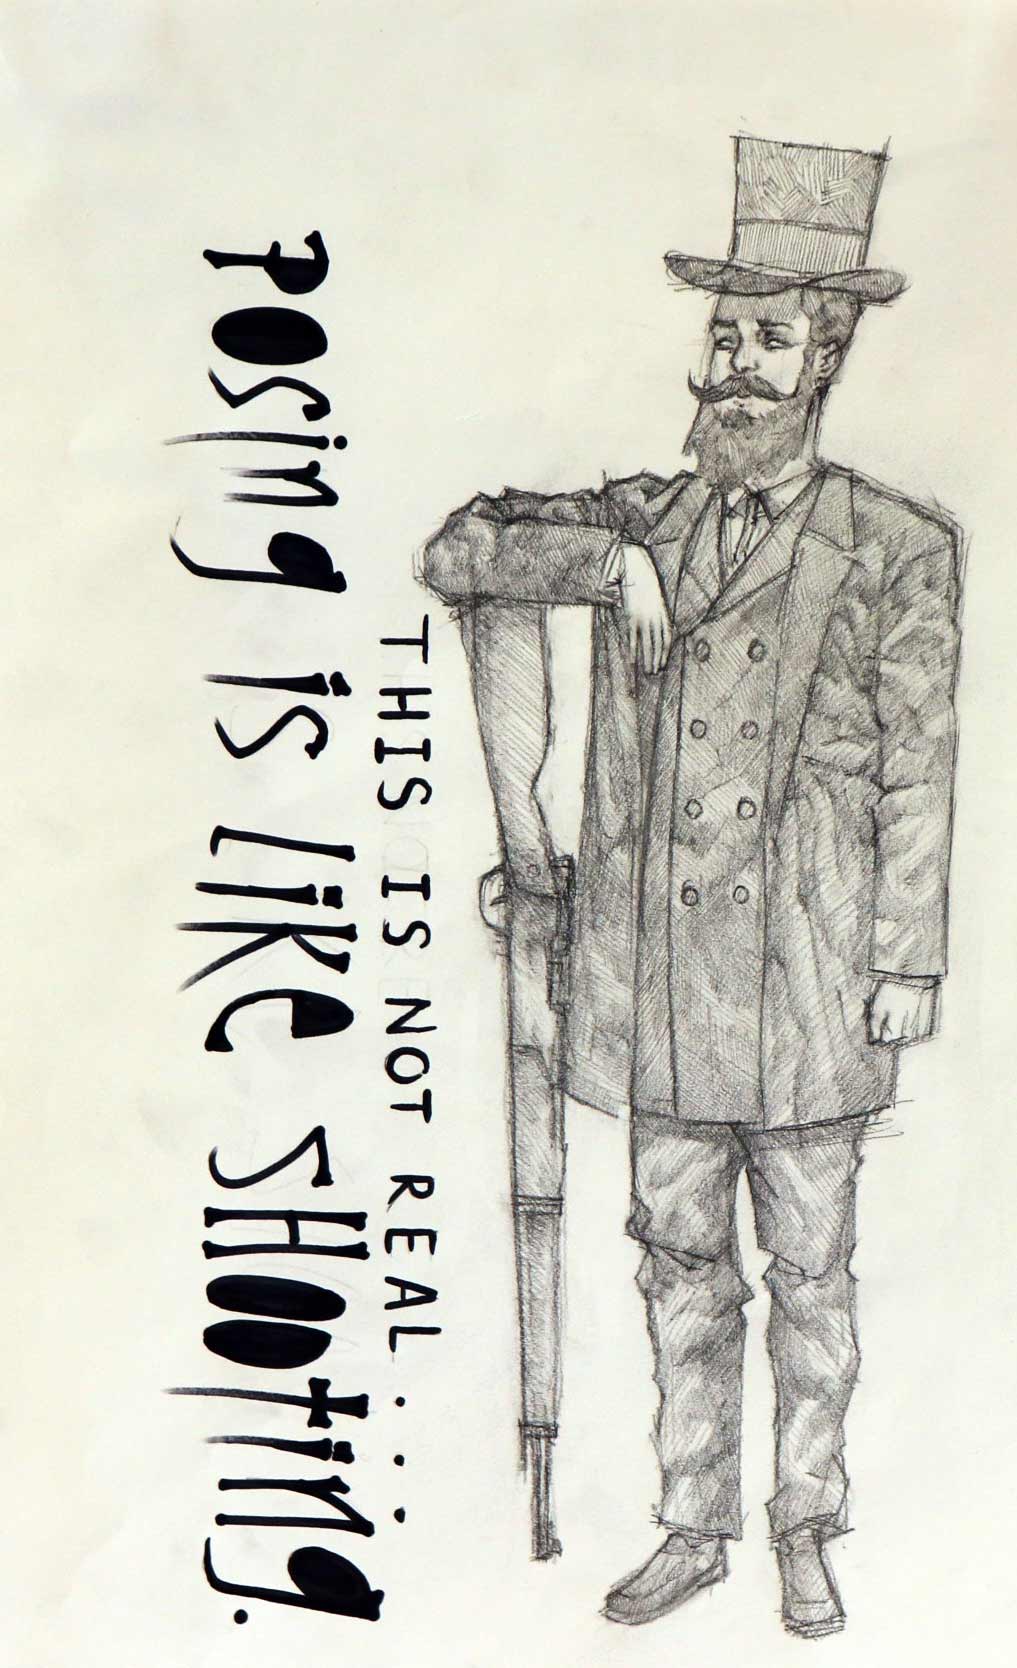 An illustration of a man in a traditional suit leaning on a gun with the text "This is not real...posing is like shooting"